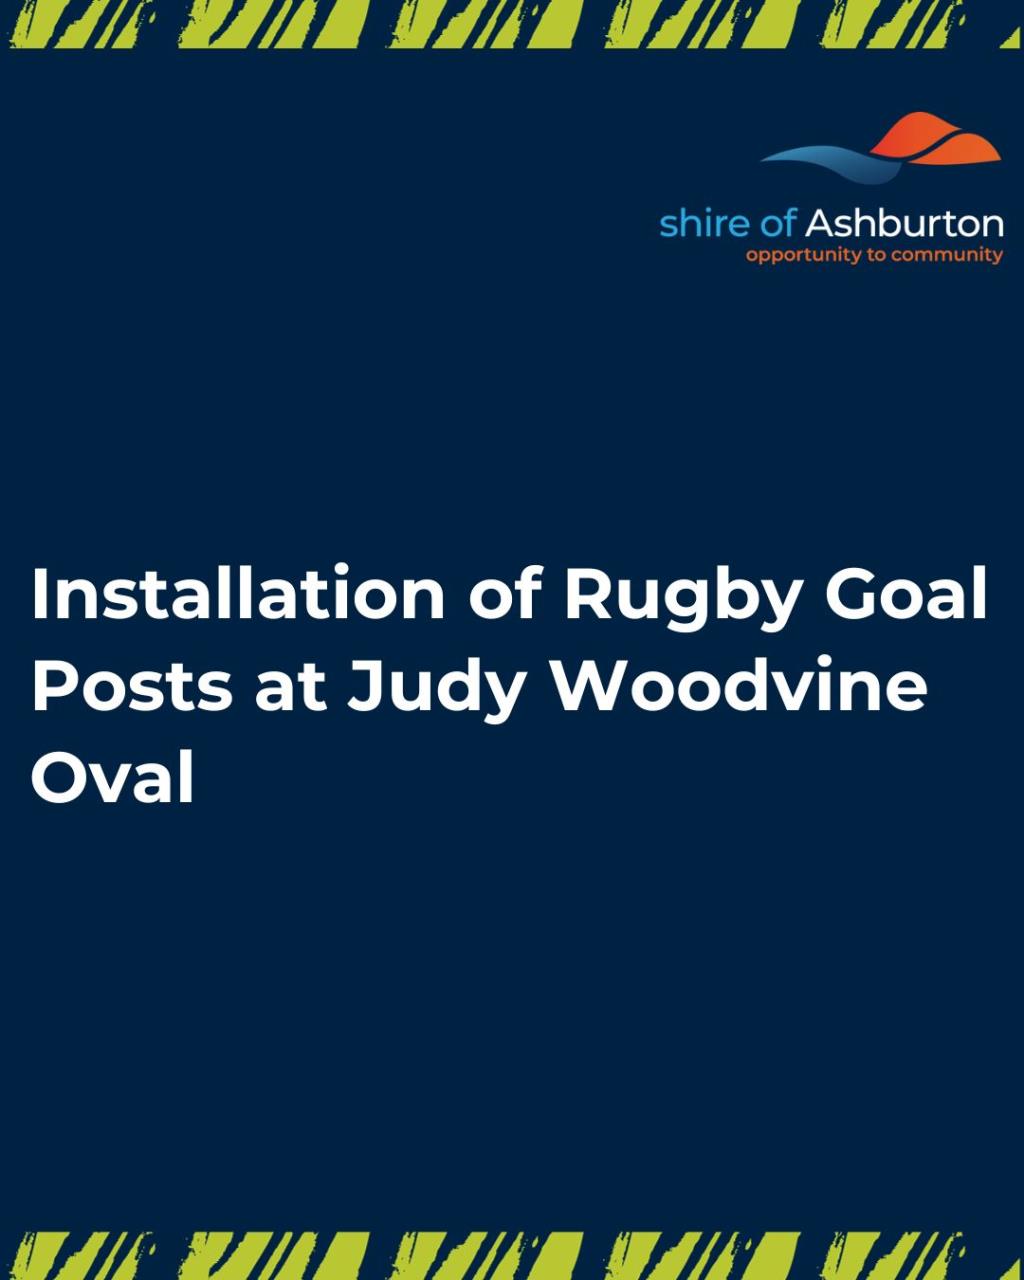 Installation of Rugby Goal Posts at Woodvine Oval